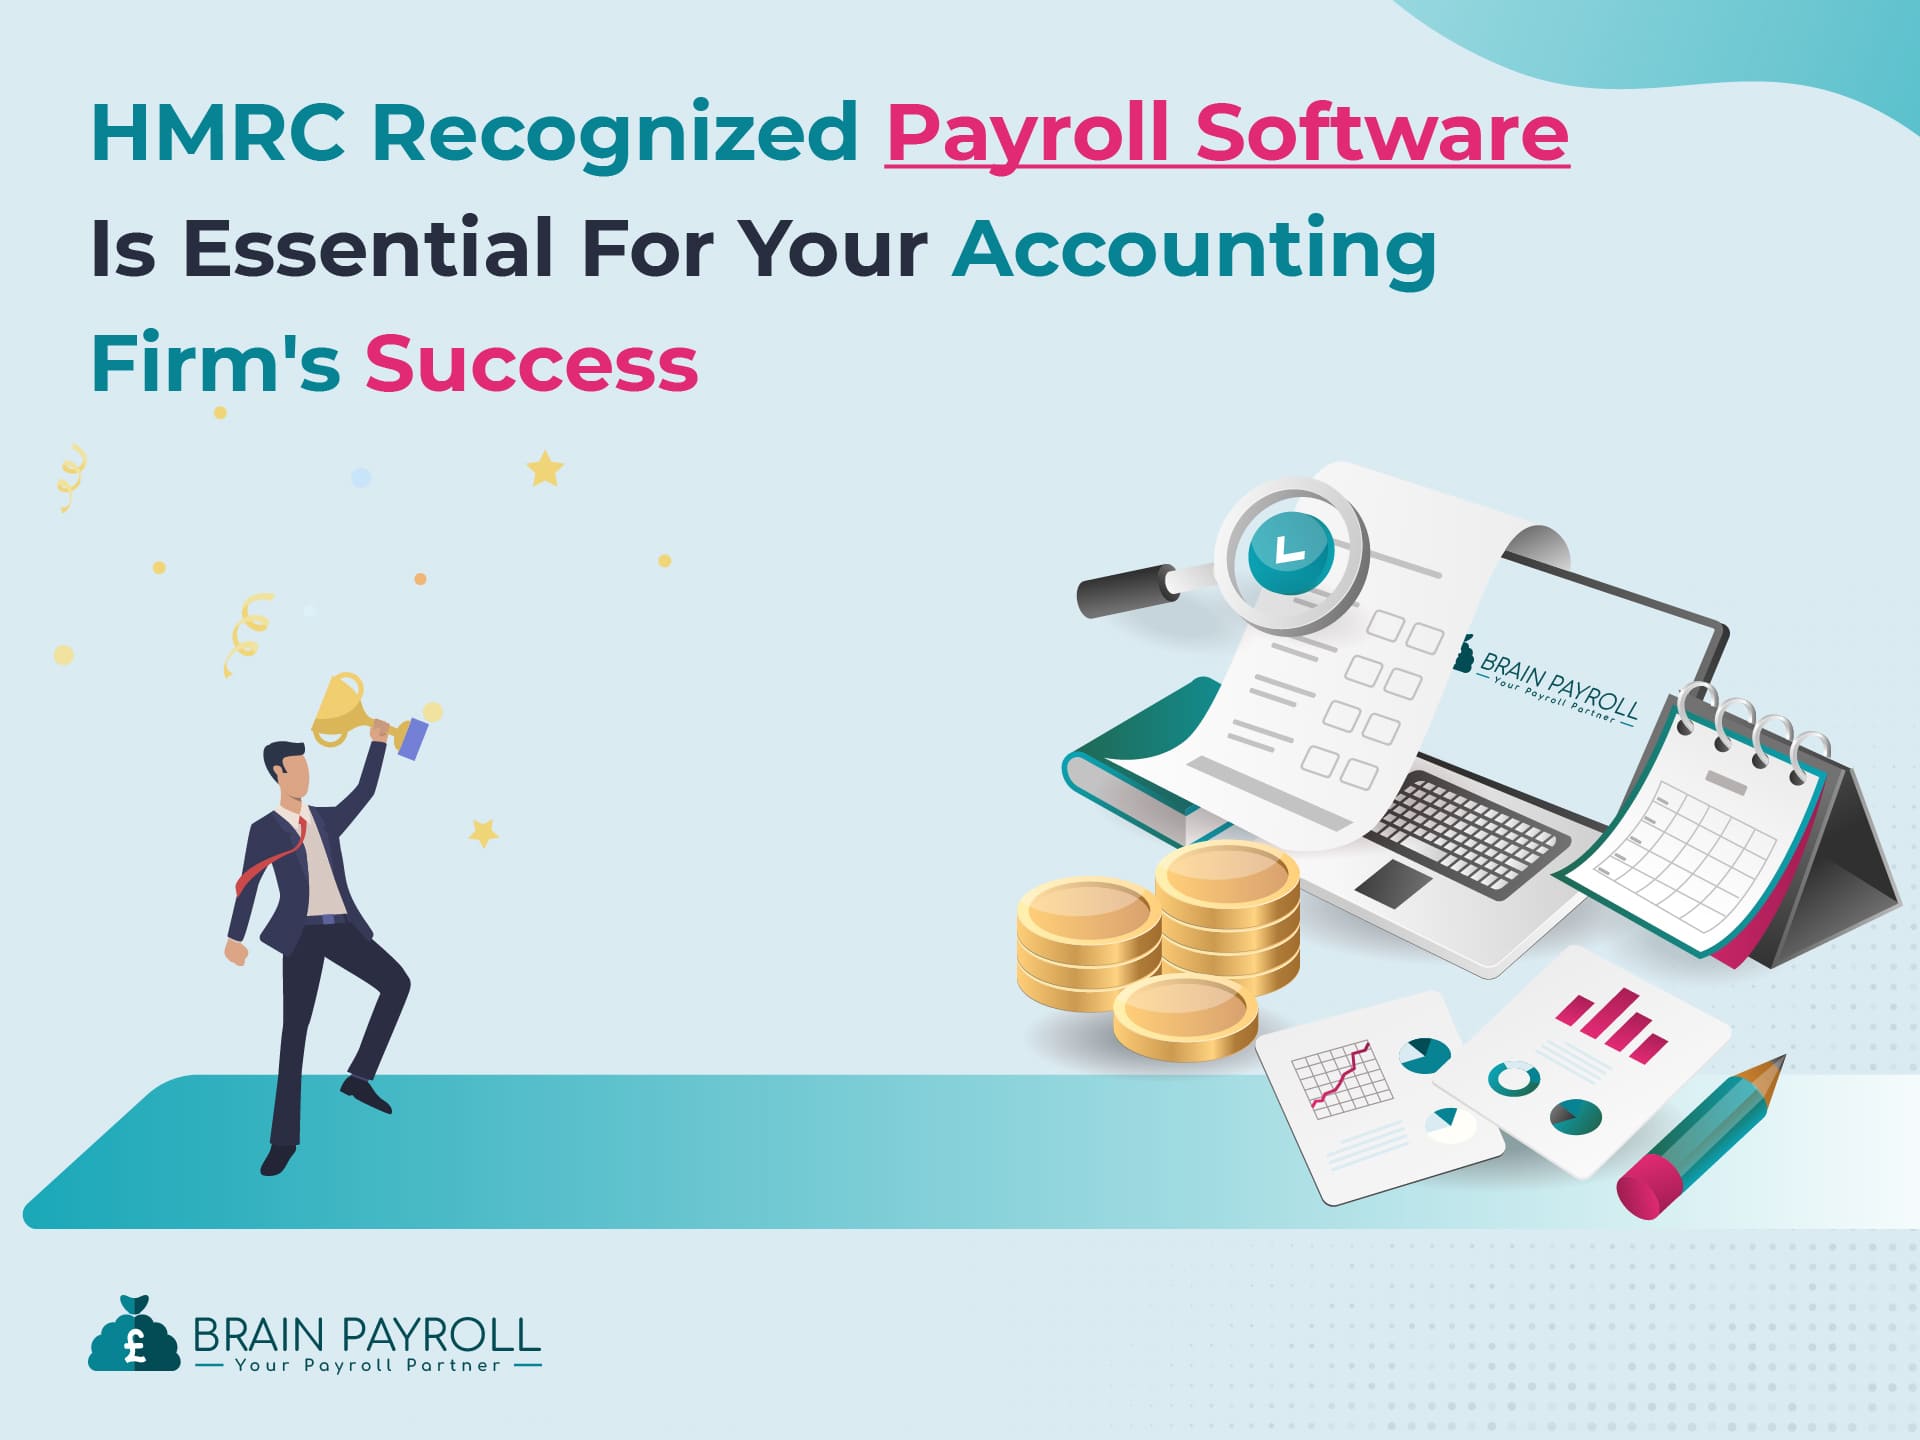 Why HMRC Payroll Software Is Essential for Your Accounting Firm's Success